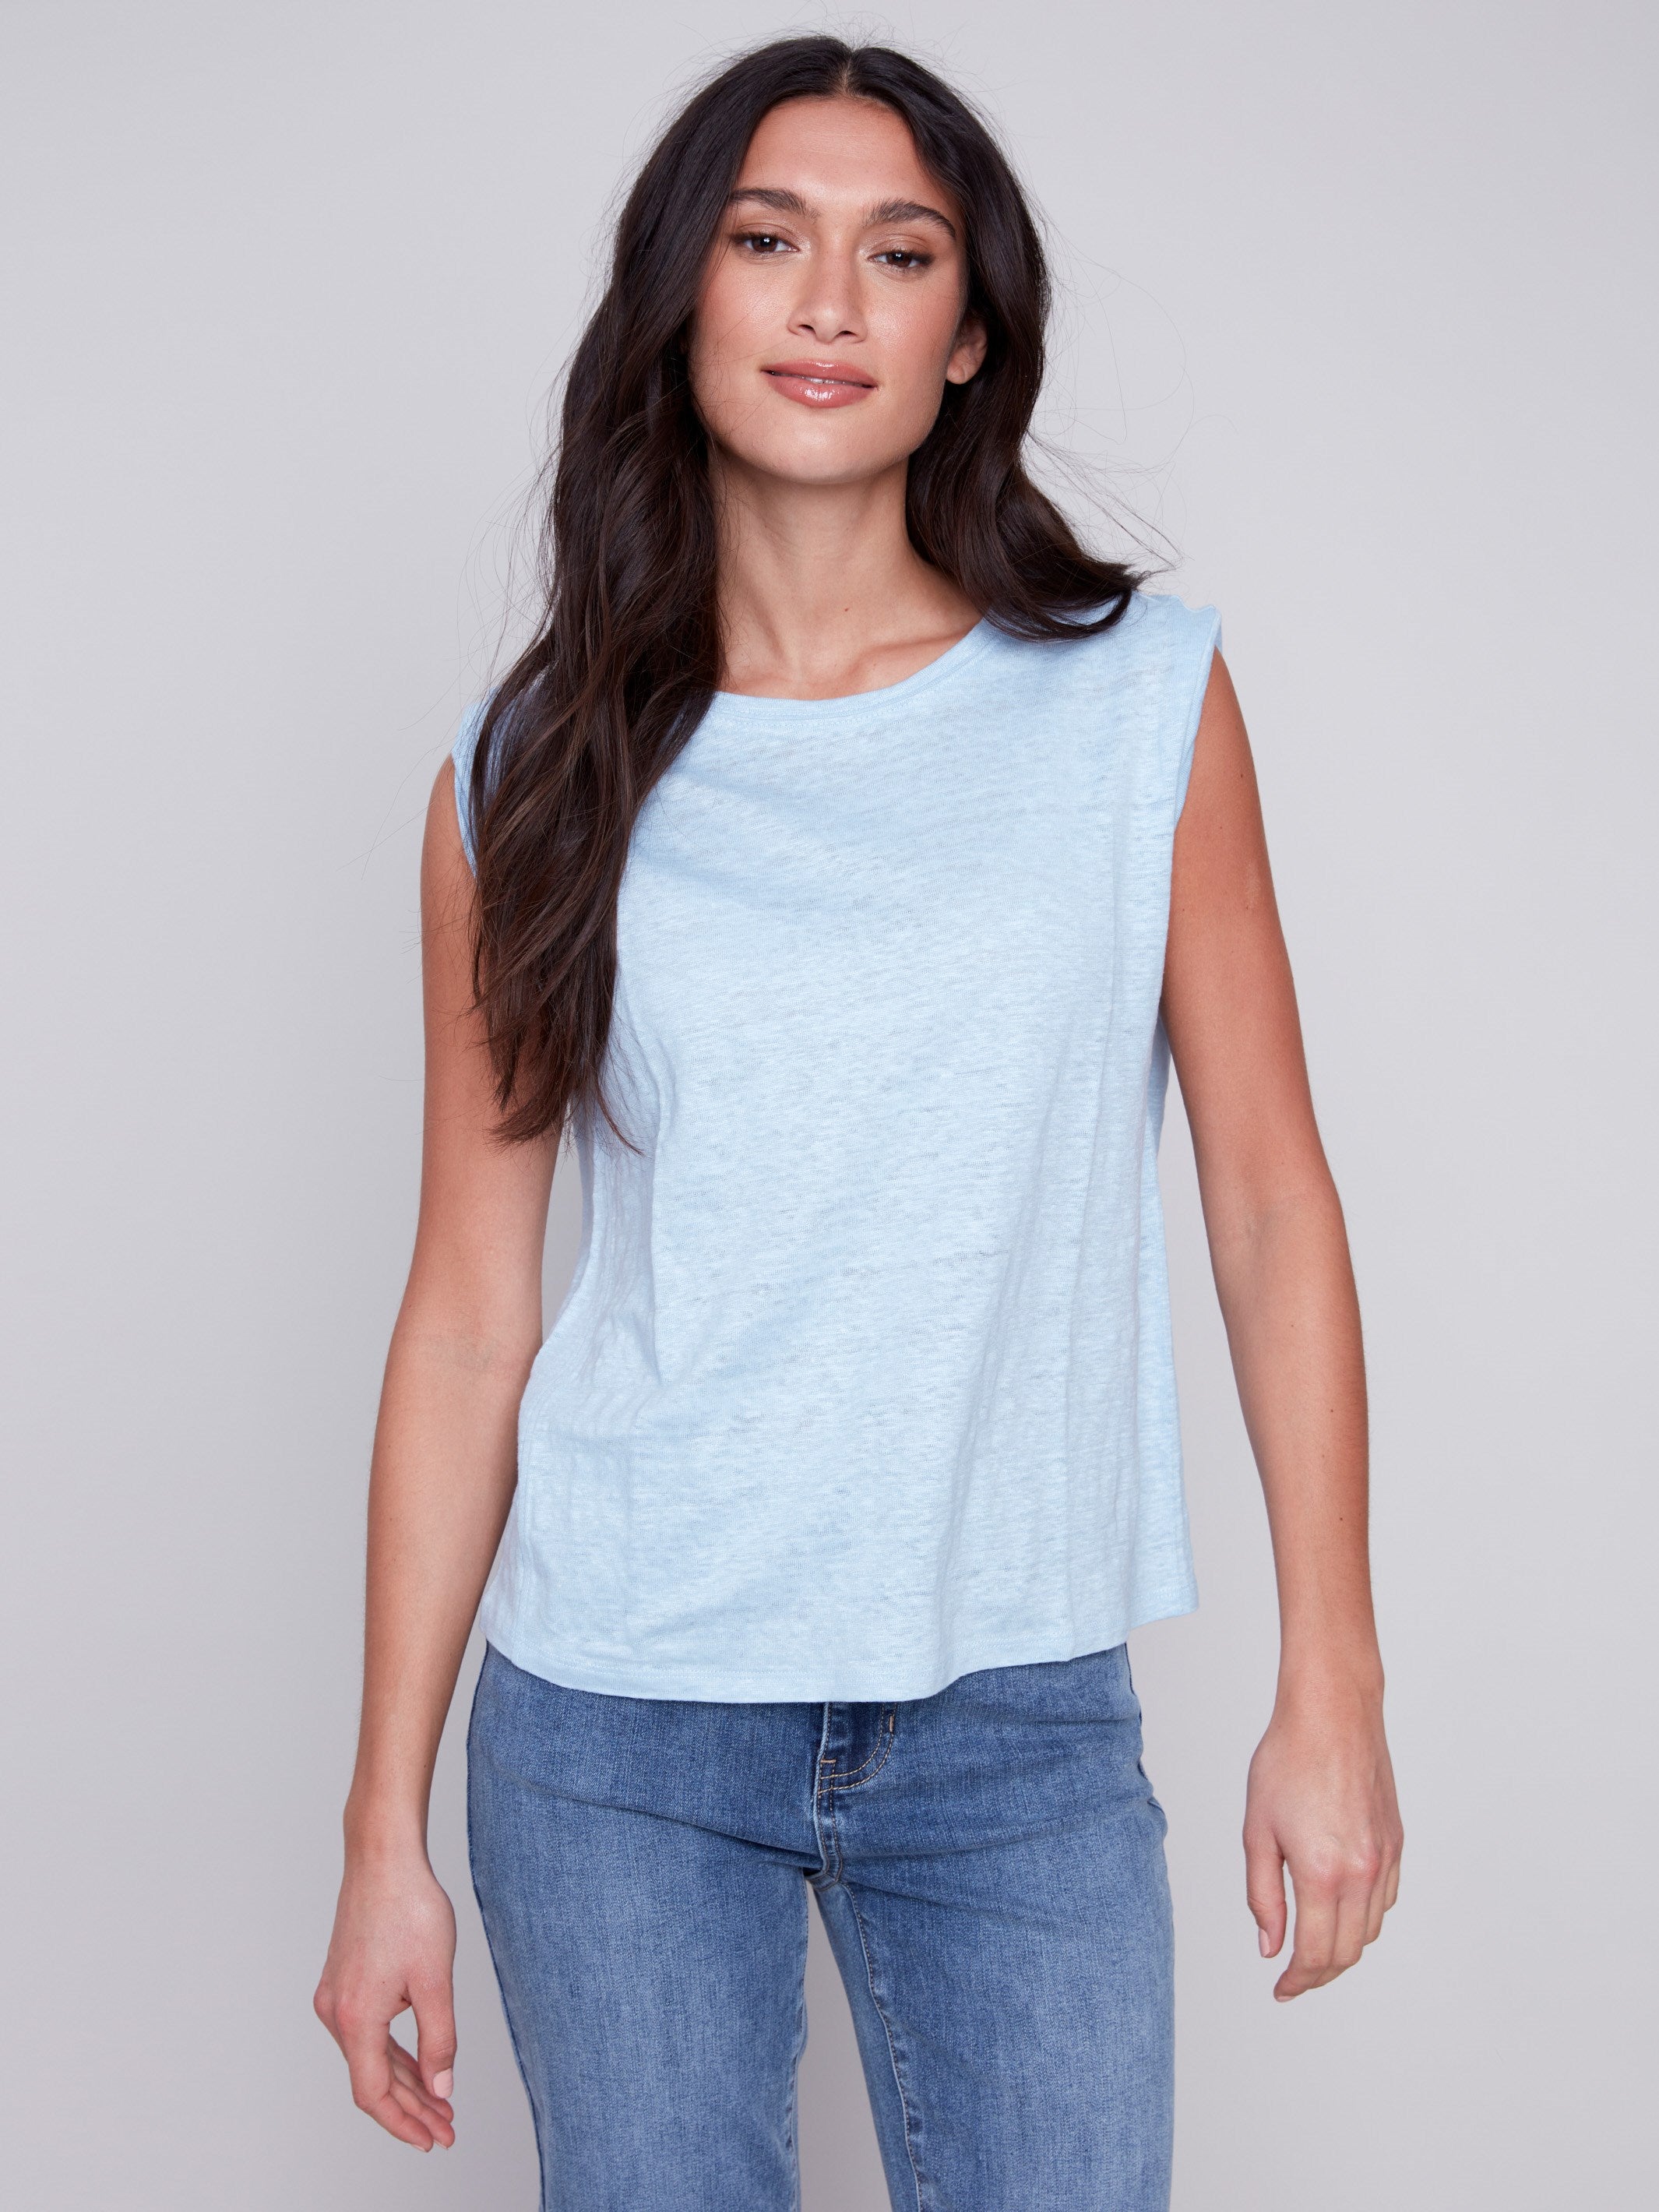 Charlie B Linen Tank Top with Sleeve Detail - Sky - Image 4